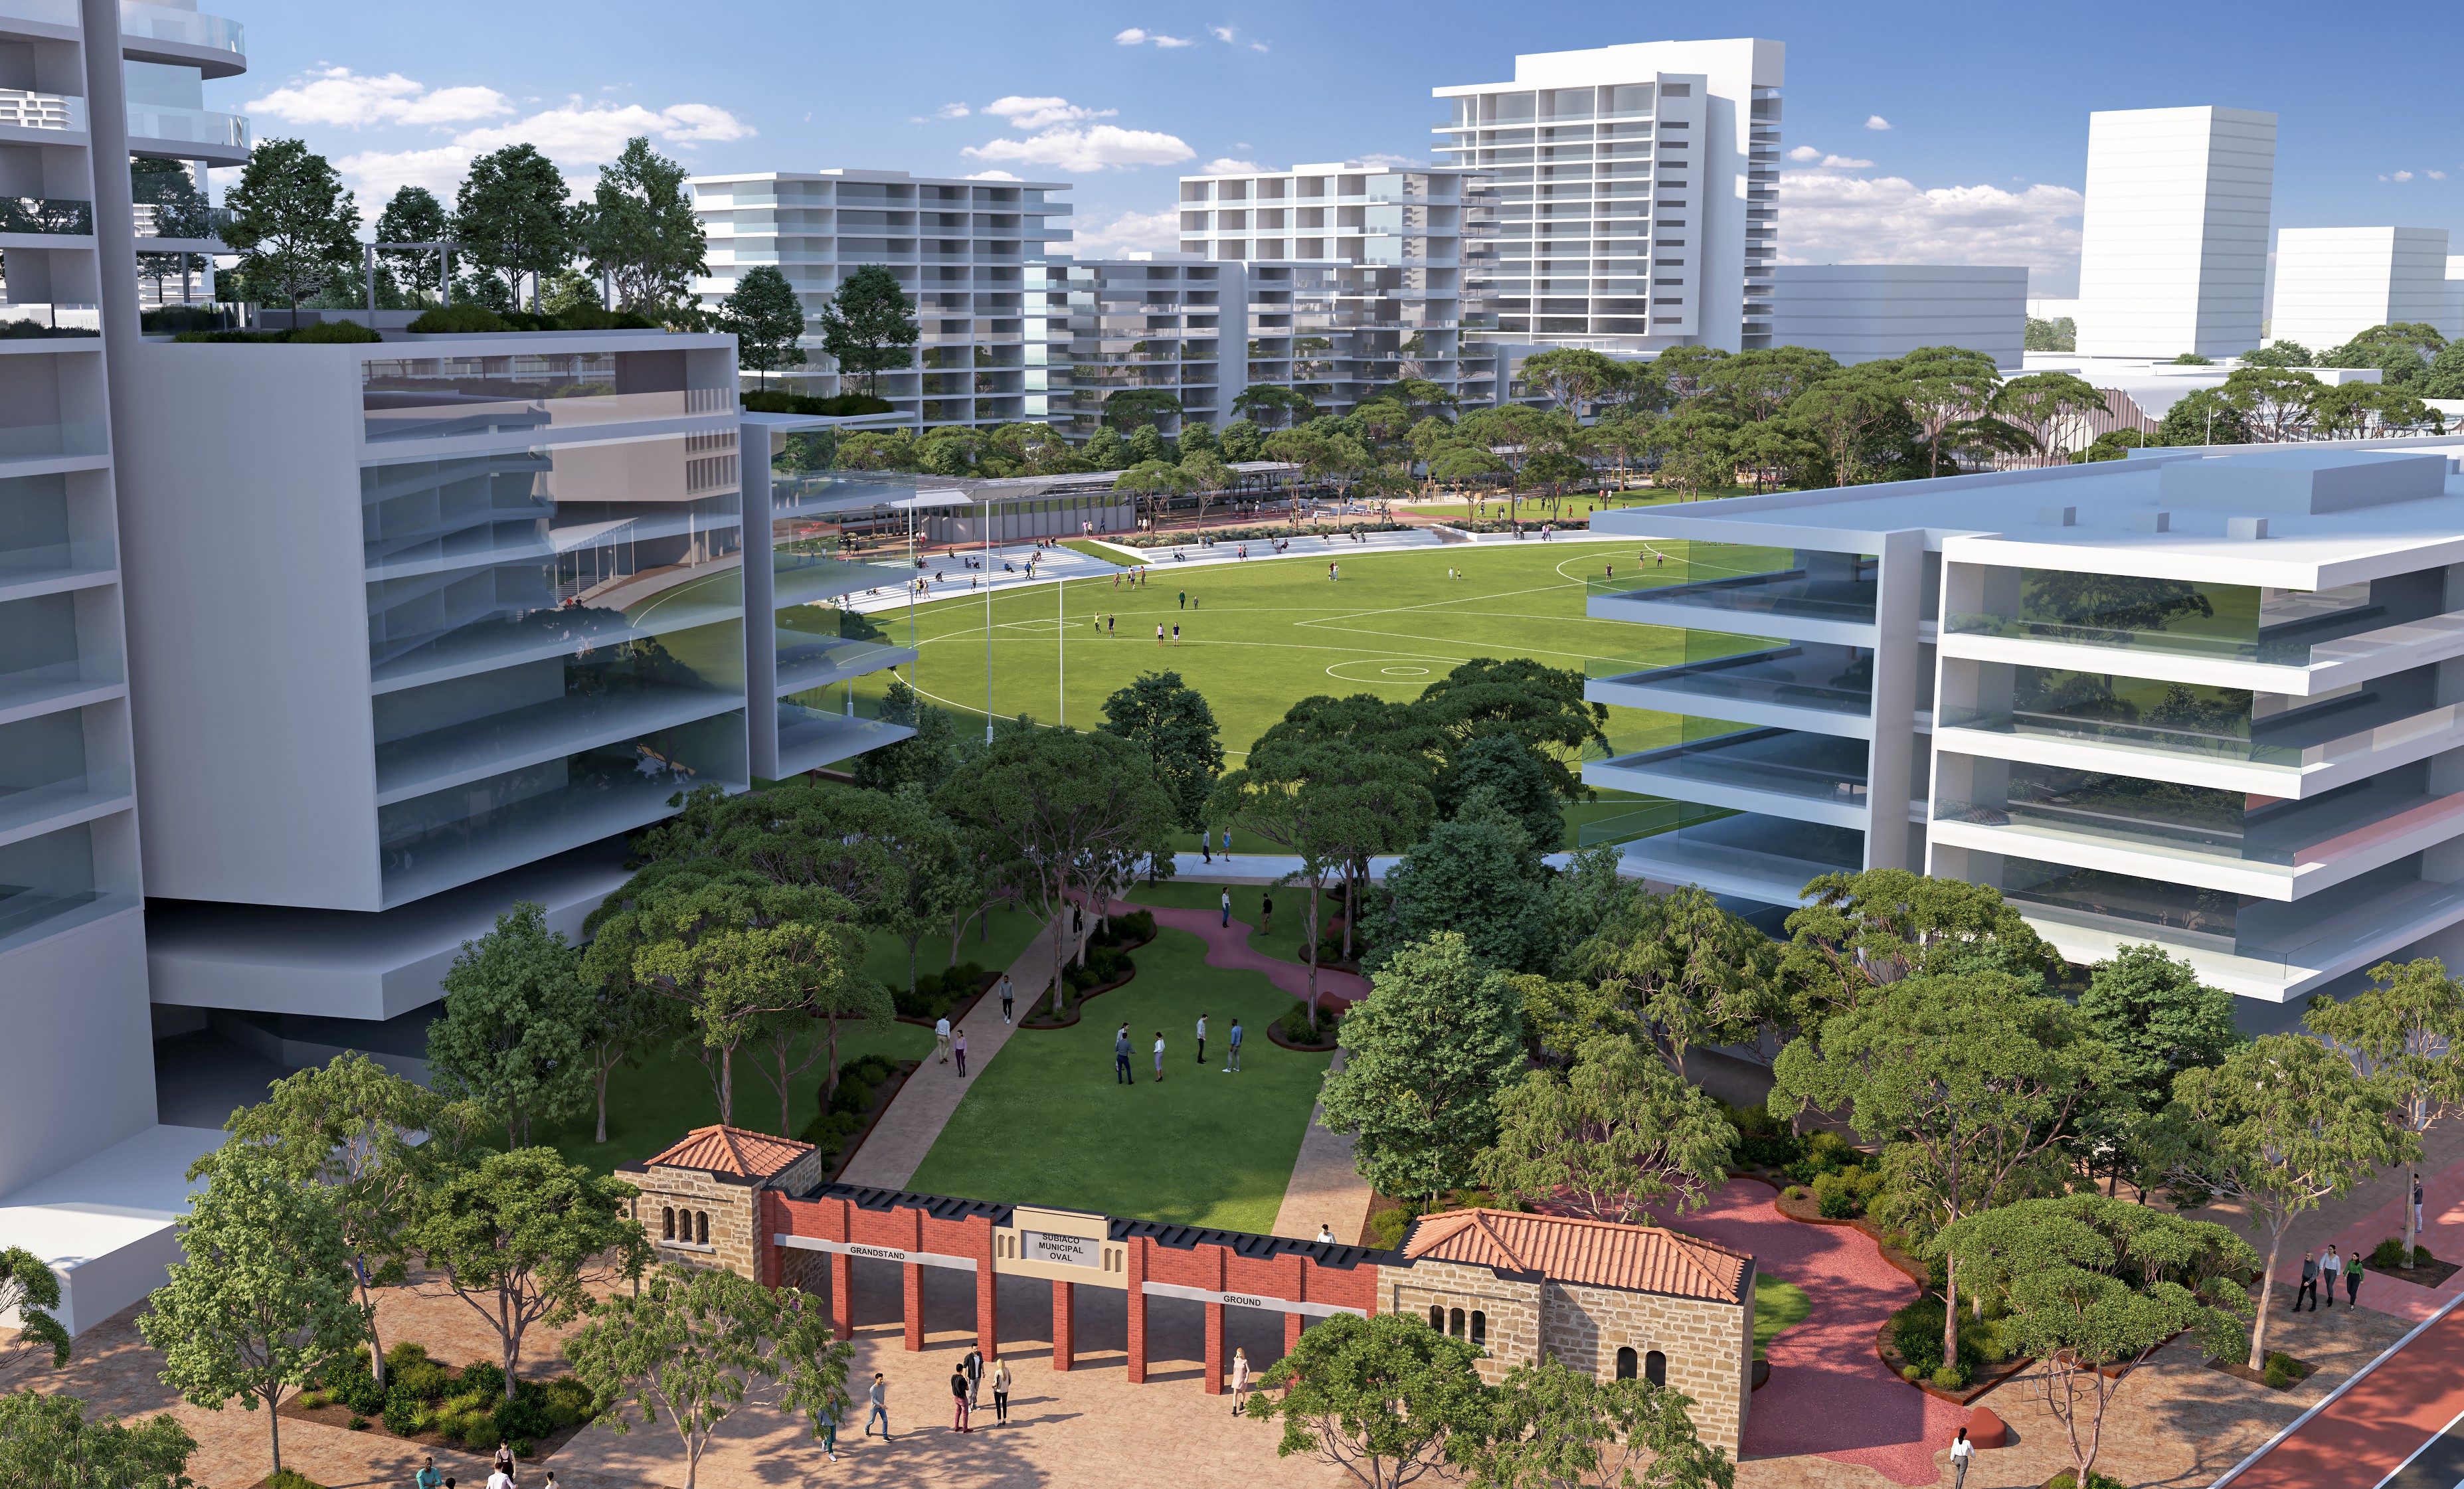 Indicative render of the Subiaco Oval heritage walk and development